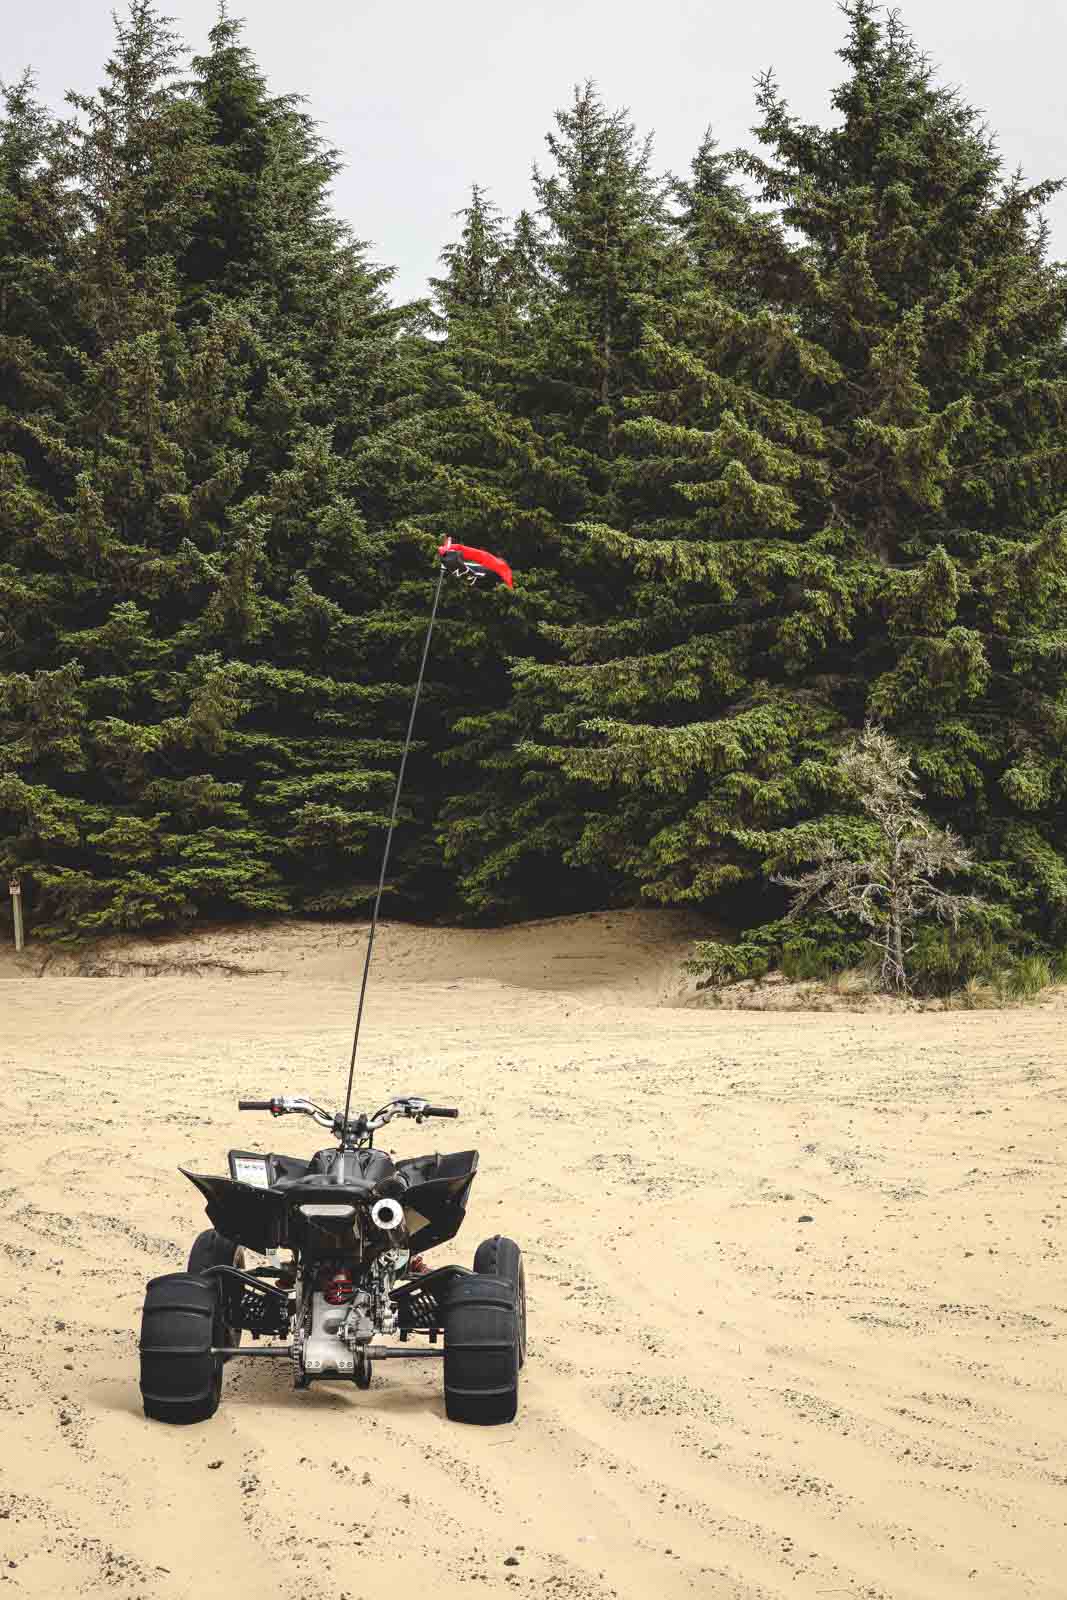 4x4 ATV on sand with forest in background at William Tugman State Park in Oregon